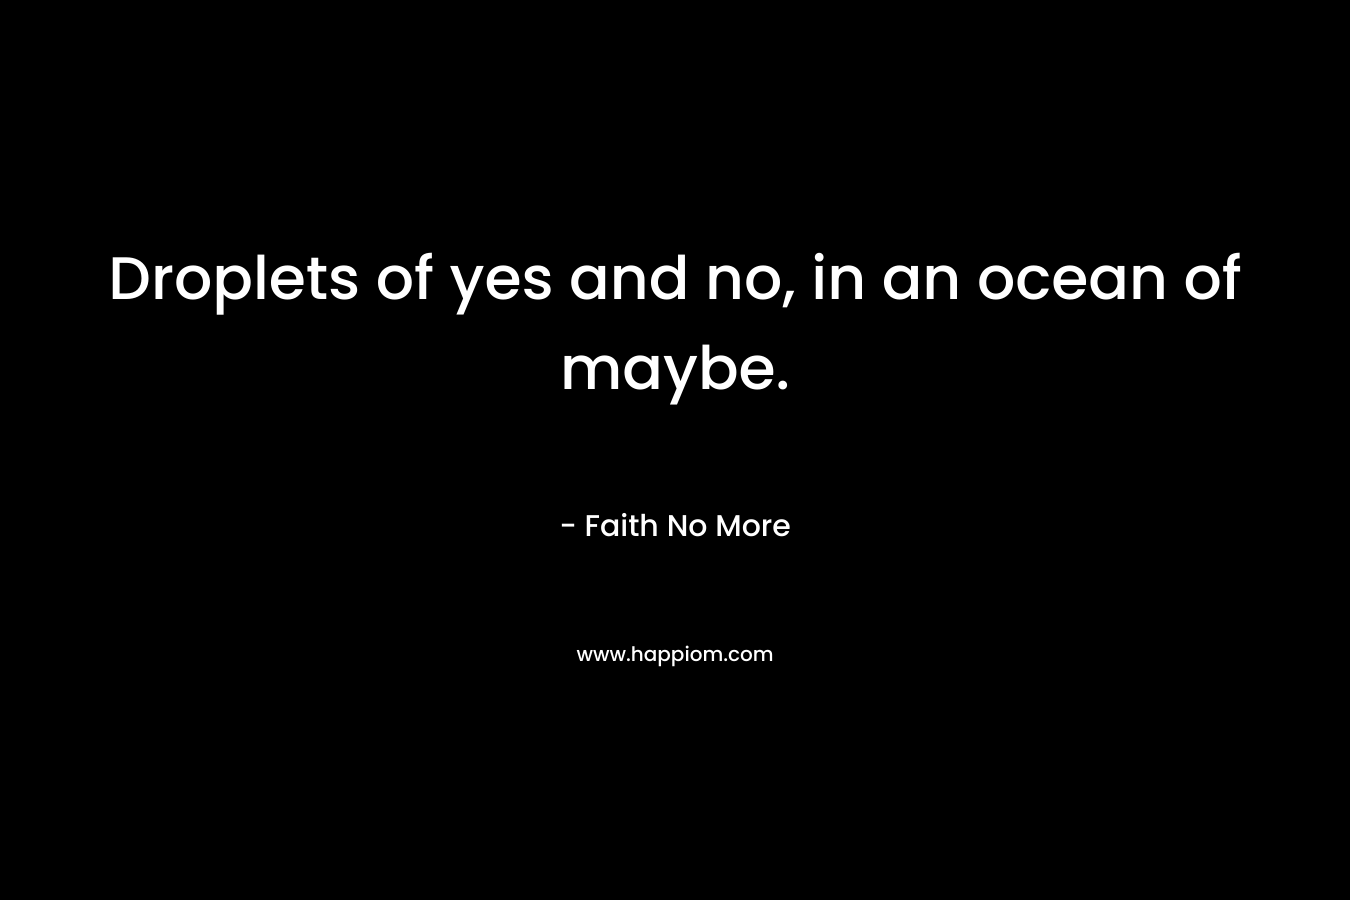 Droplets of yes and no, in an ocean of maybe. – Faith No More